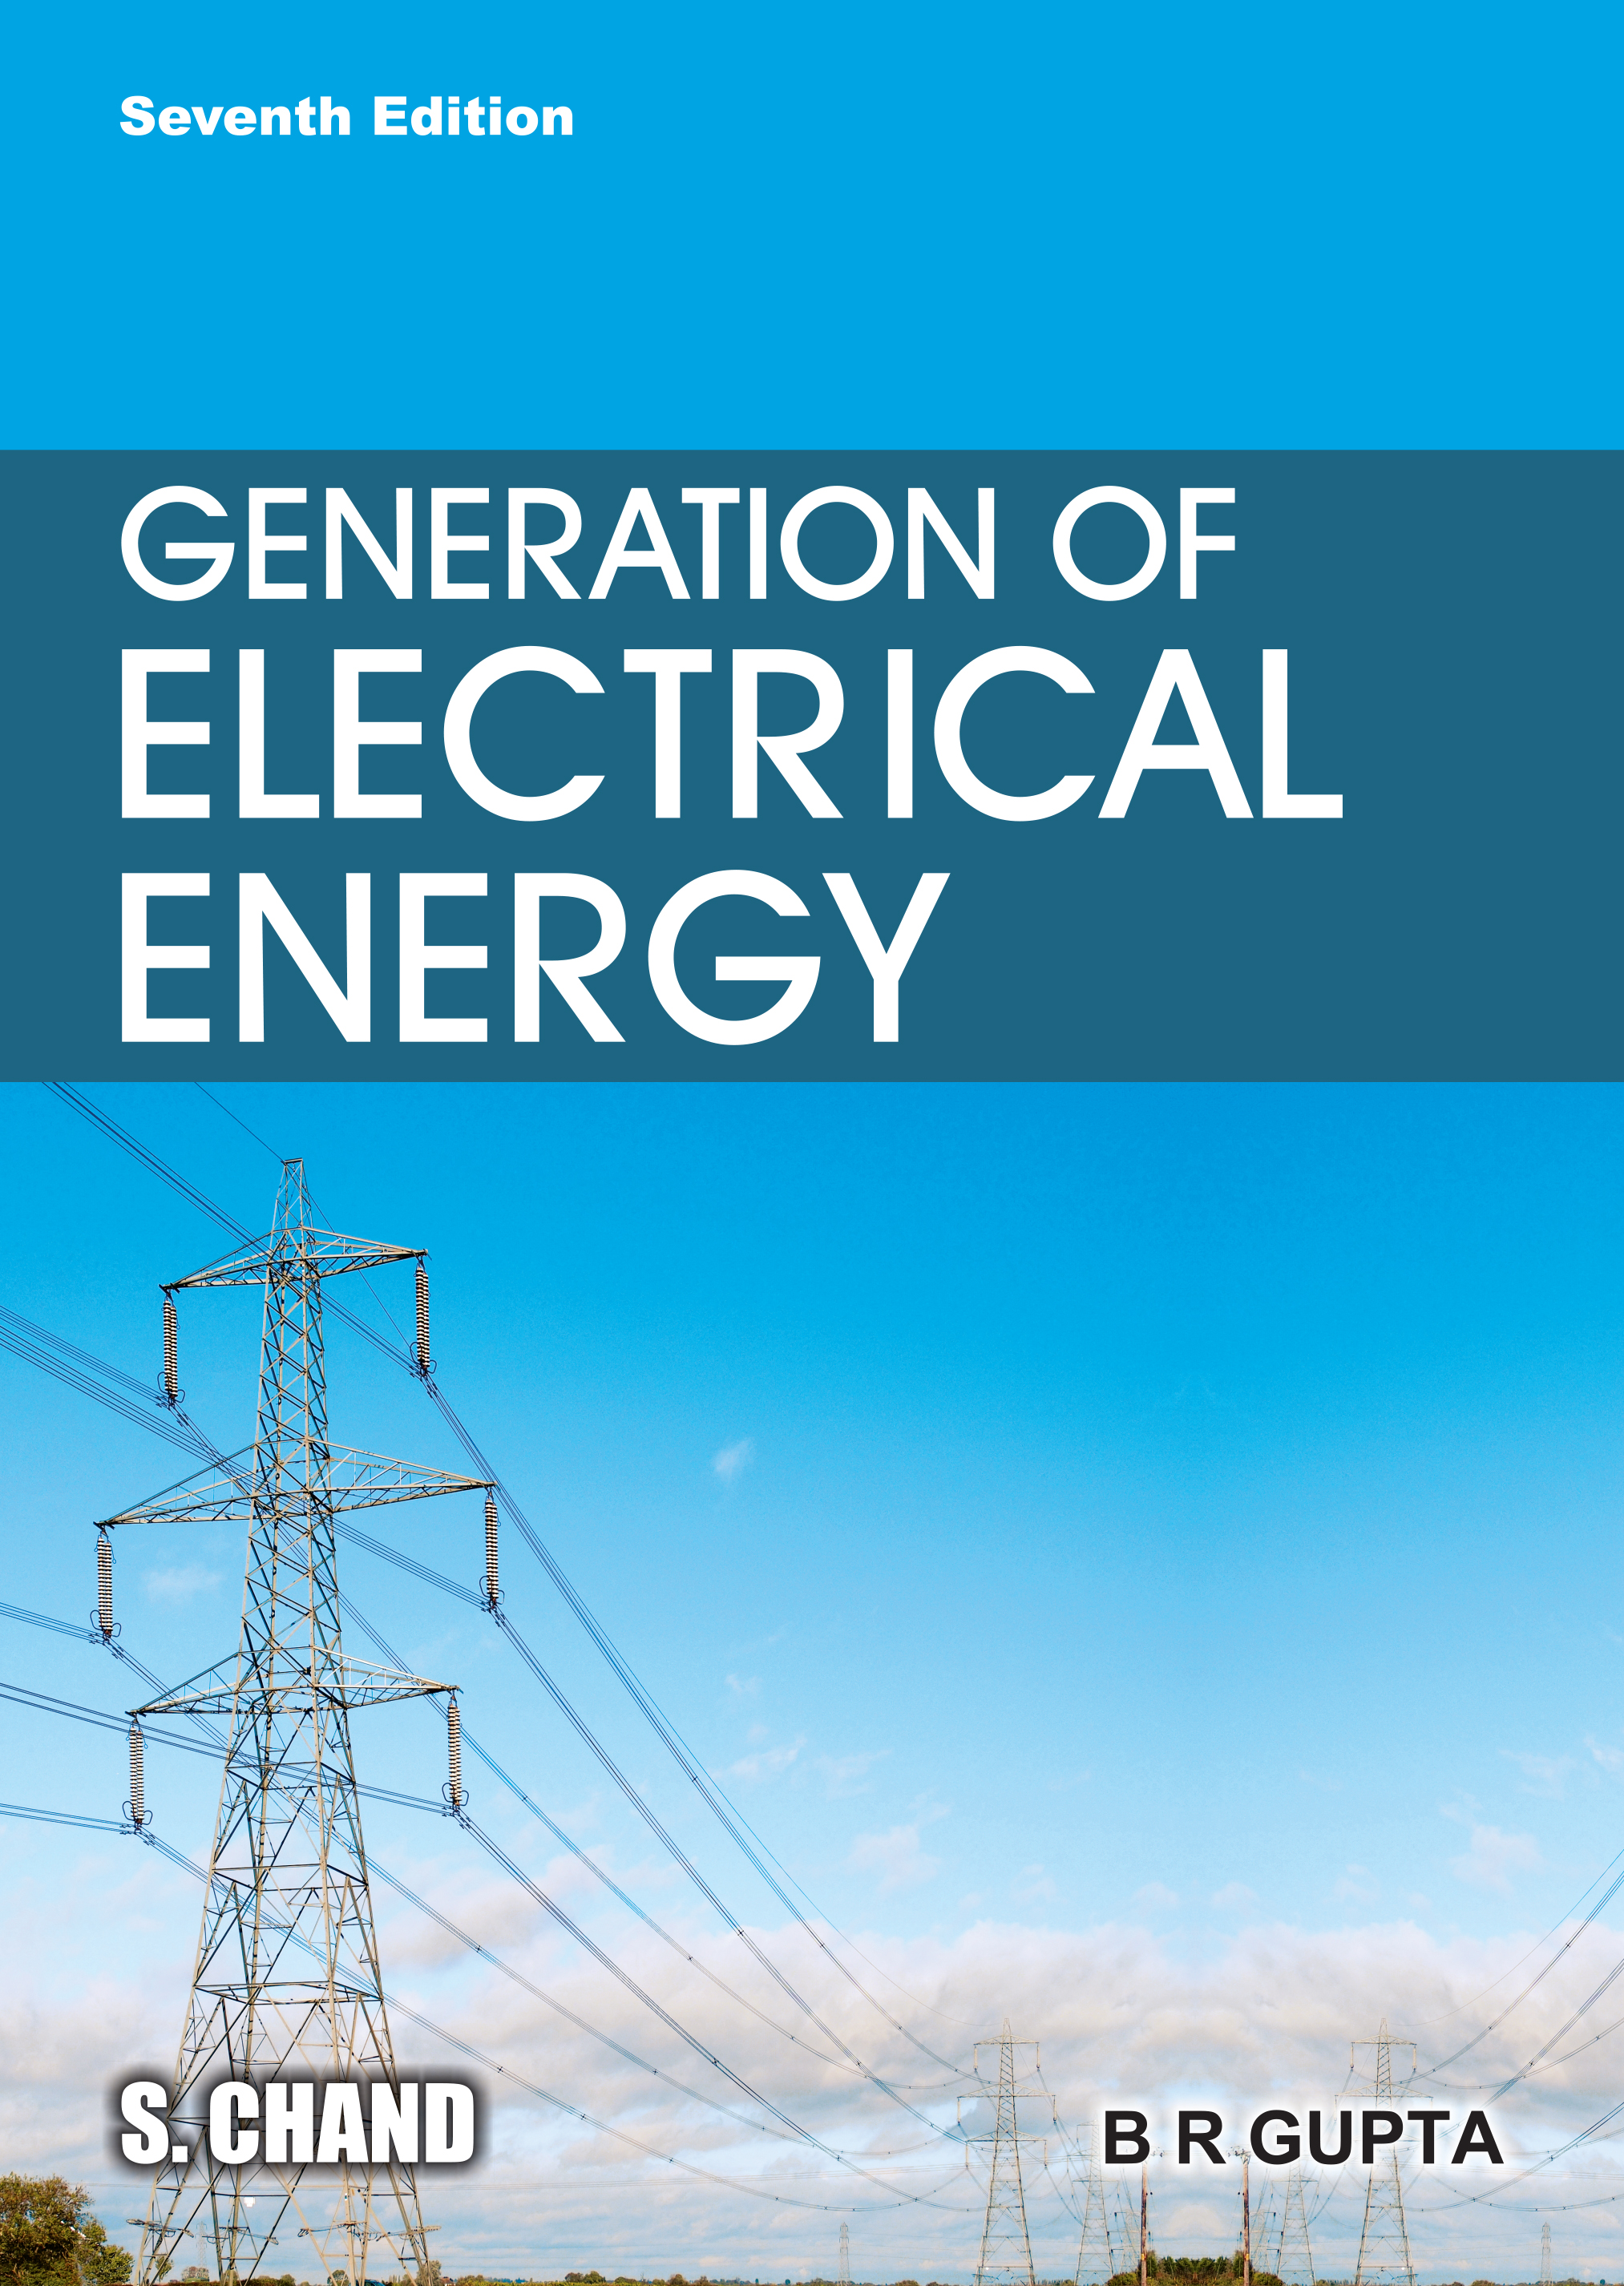 Generation of Electrical Energy